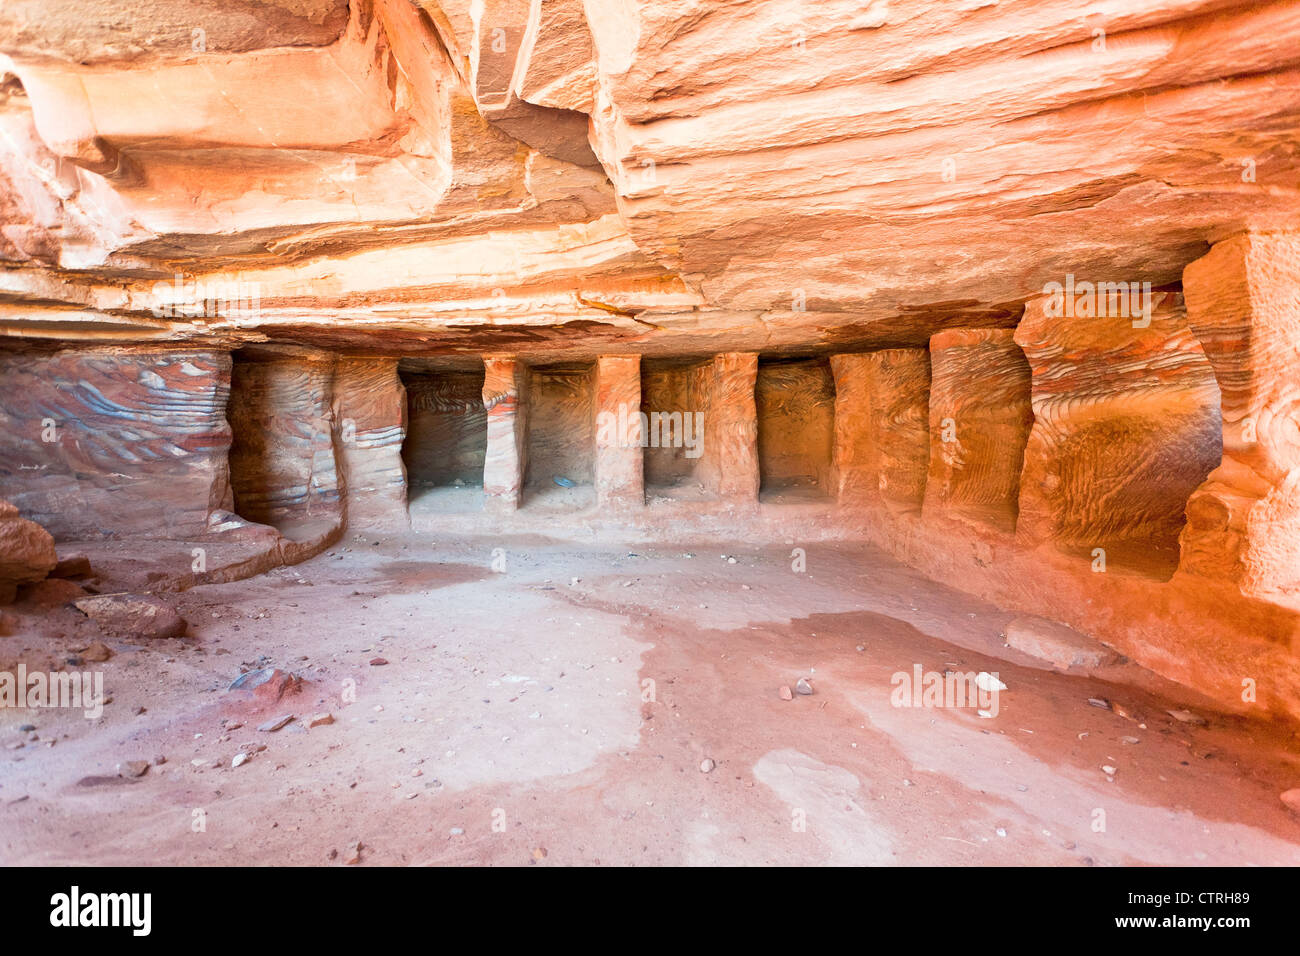 interior of ancient tomb or dwelling in sandstone cave in Petra, Jordan Stock Photo